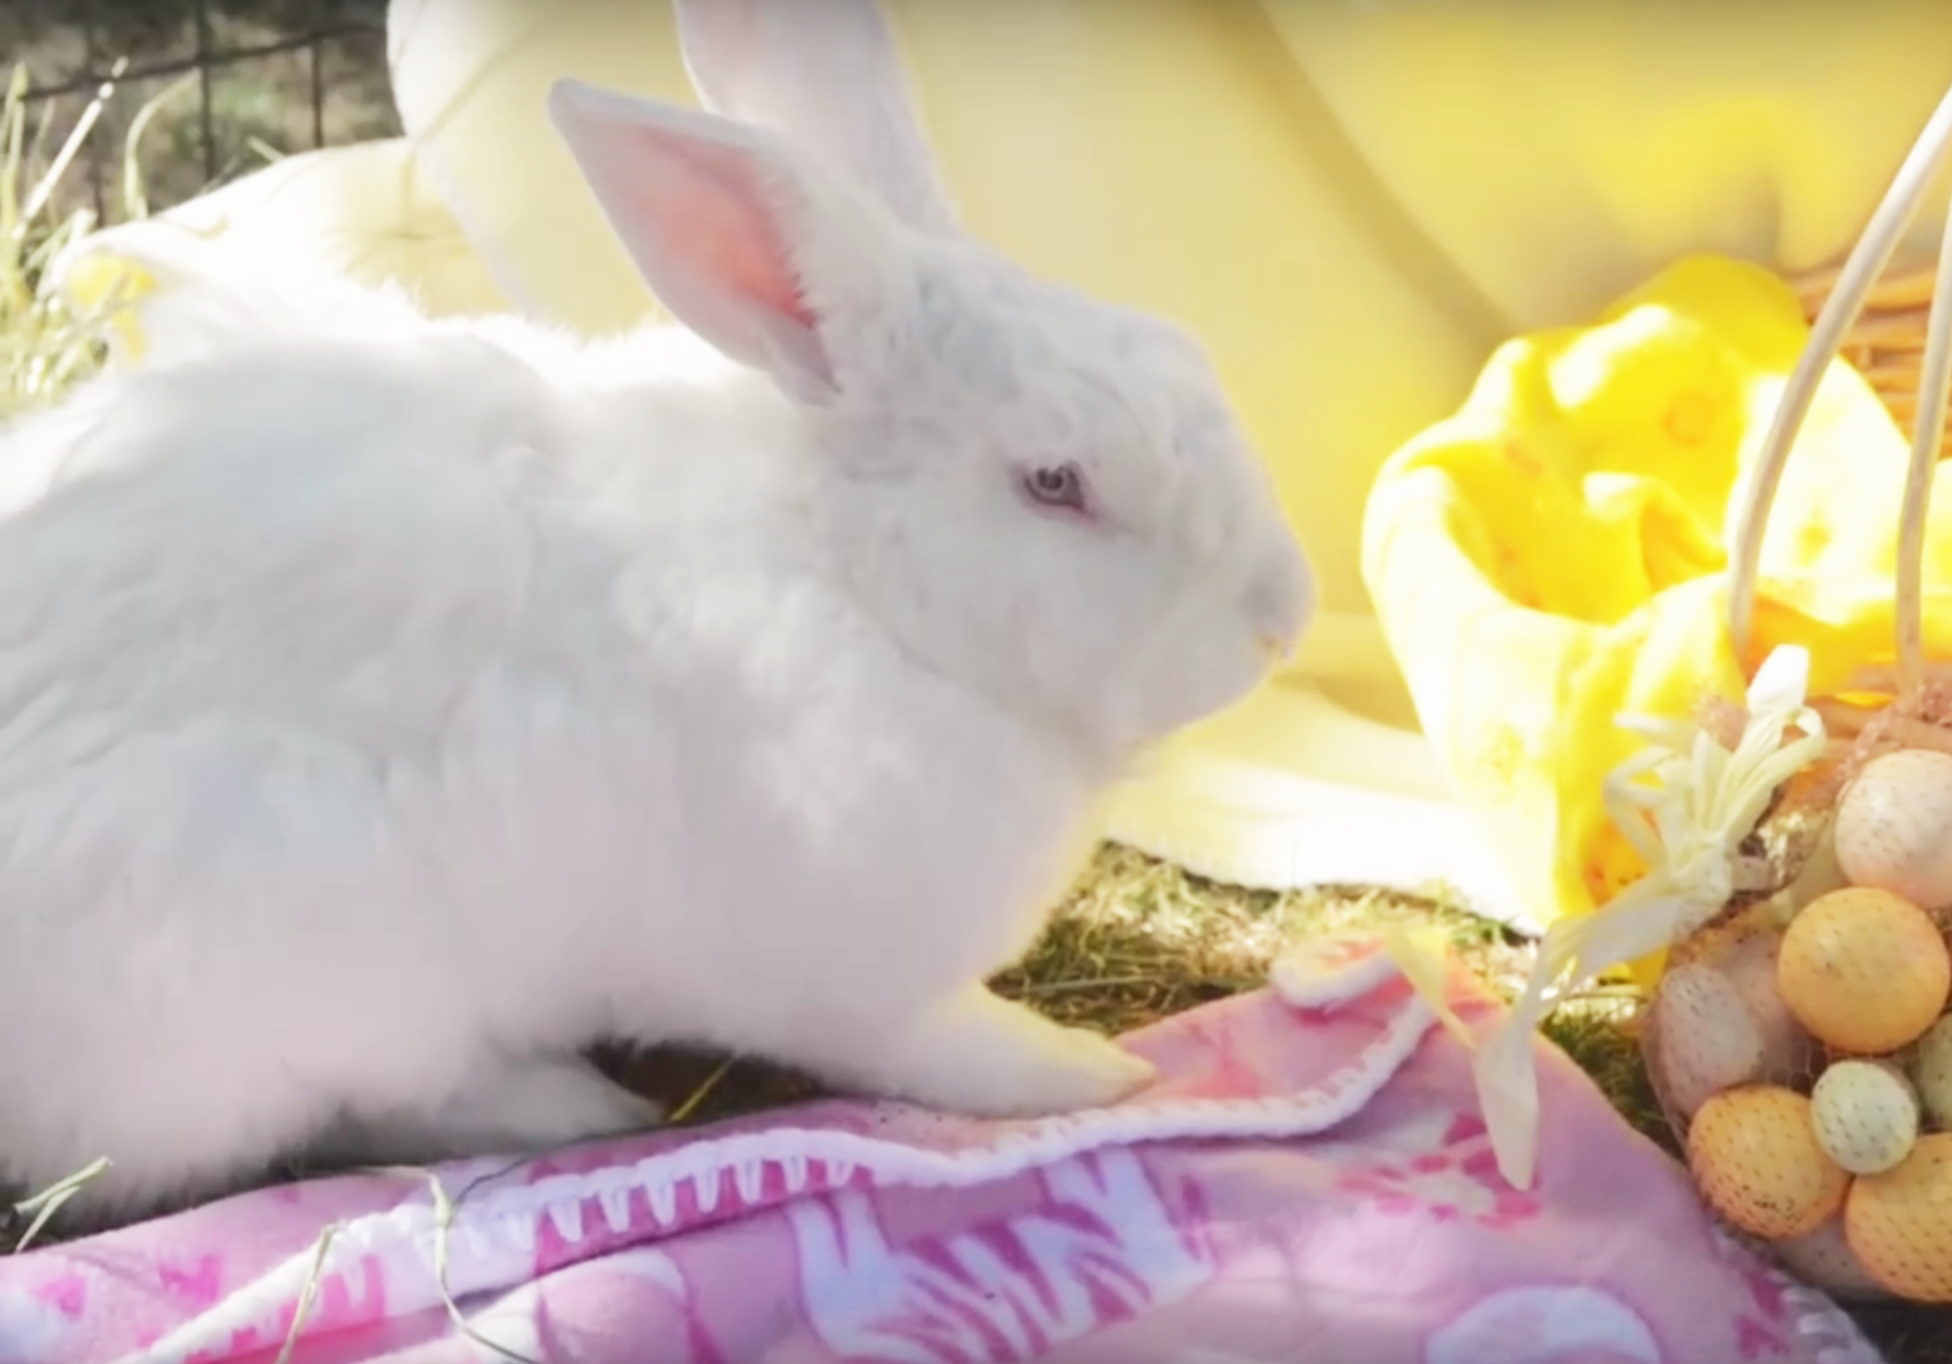 Remember, Adorable Easter Bunnies Are Pets for Life | PEOPLE.com